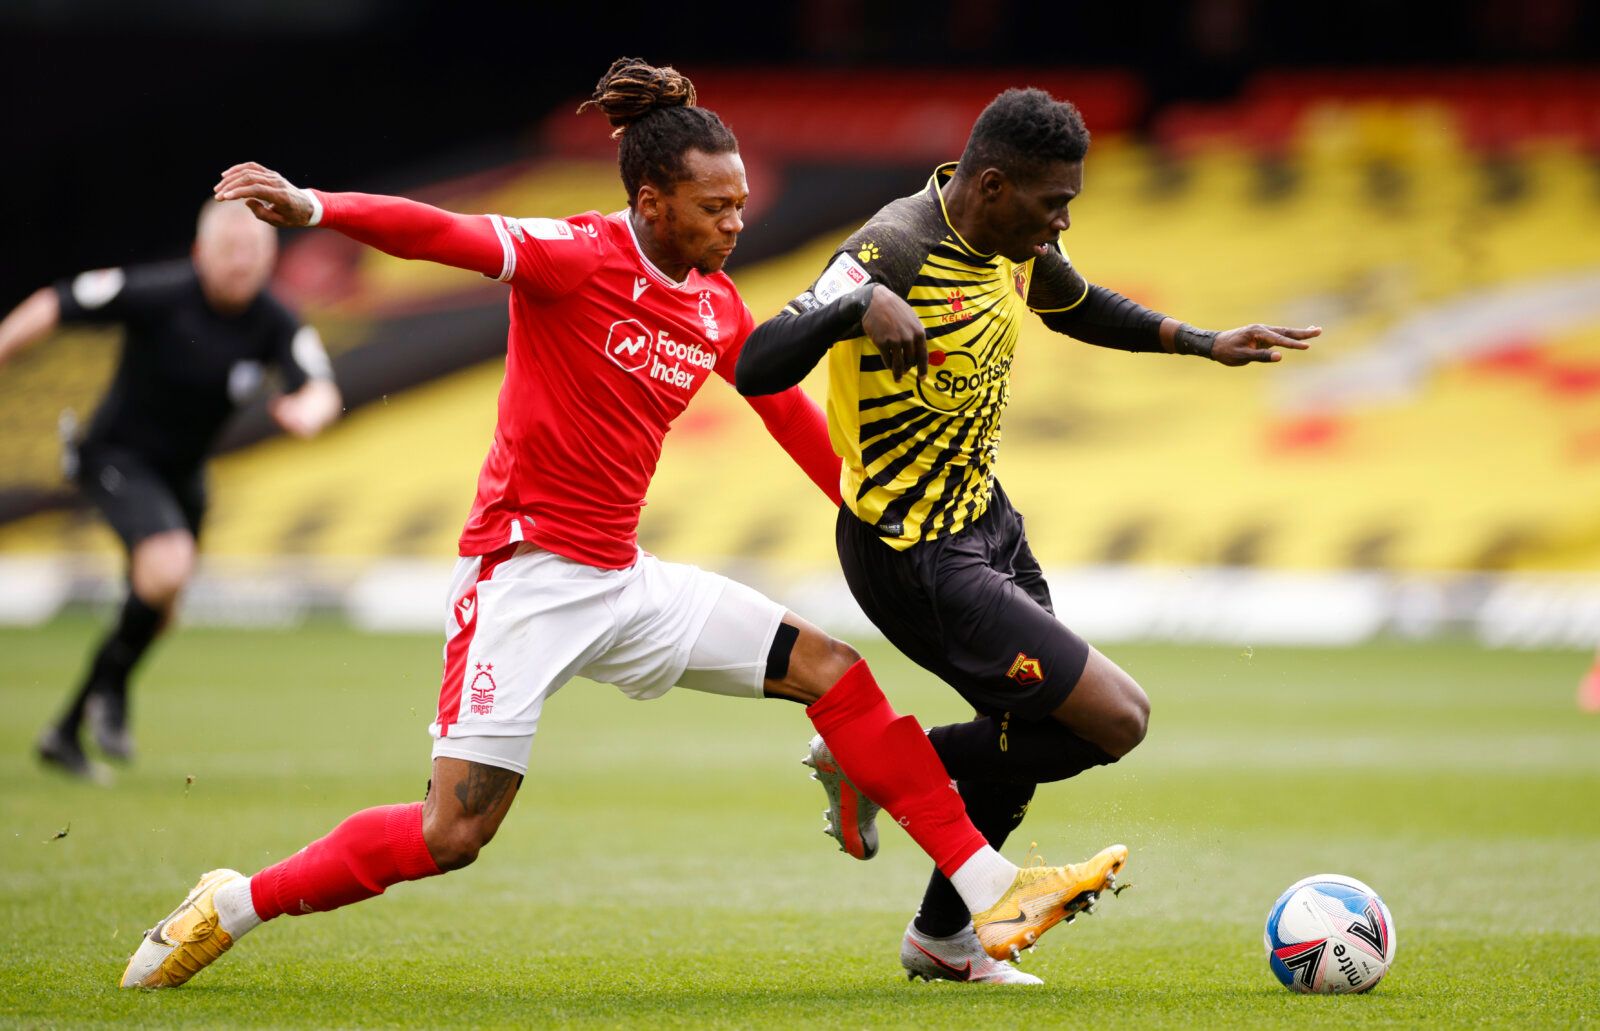 Soccer Football - Championship - Watford v Nottingham Forest - Vicarage Road, Watford, Britain - March 6, 2021 Watford's Ismaila Sarr in action with Nottingham Forest's Gaetan Bong Action Images/John Sibley EDITORIAL USE ONLY. No use with unauthorized audio, video, data, fixture lists, club/league logos or 'live' services. Online in-match use limited to 75 images, no video emulation. No use in betting, games or single club /league/player publications.  Please contact your account representative 